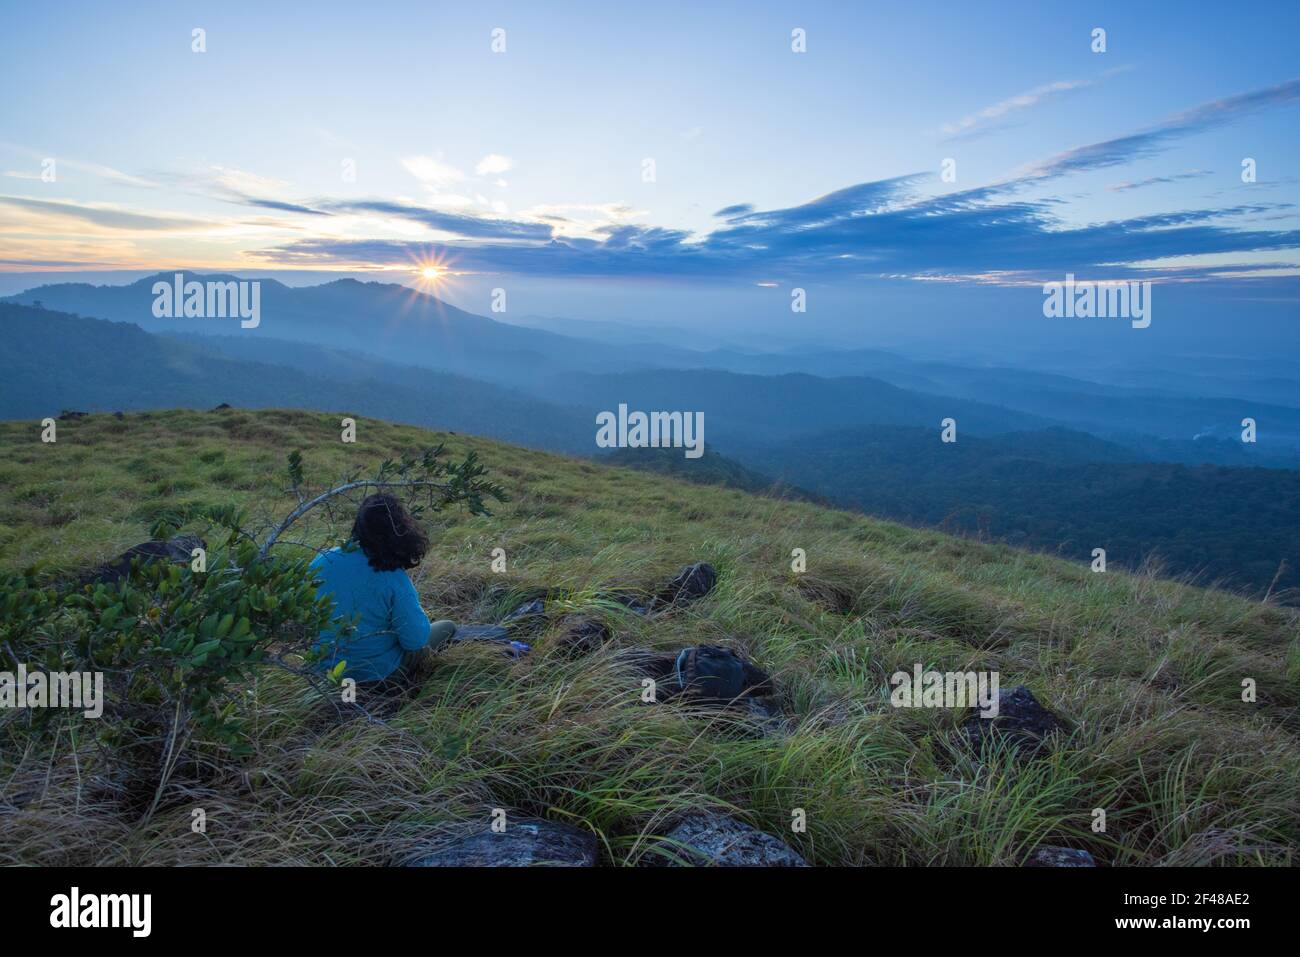 A lady enjoying the magnificent view from a hilltop in Wayanad during early morning (image taken in Wayanad, Kerala) Stock Photo